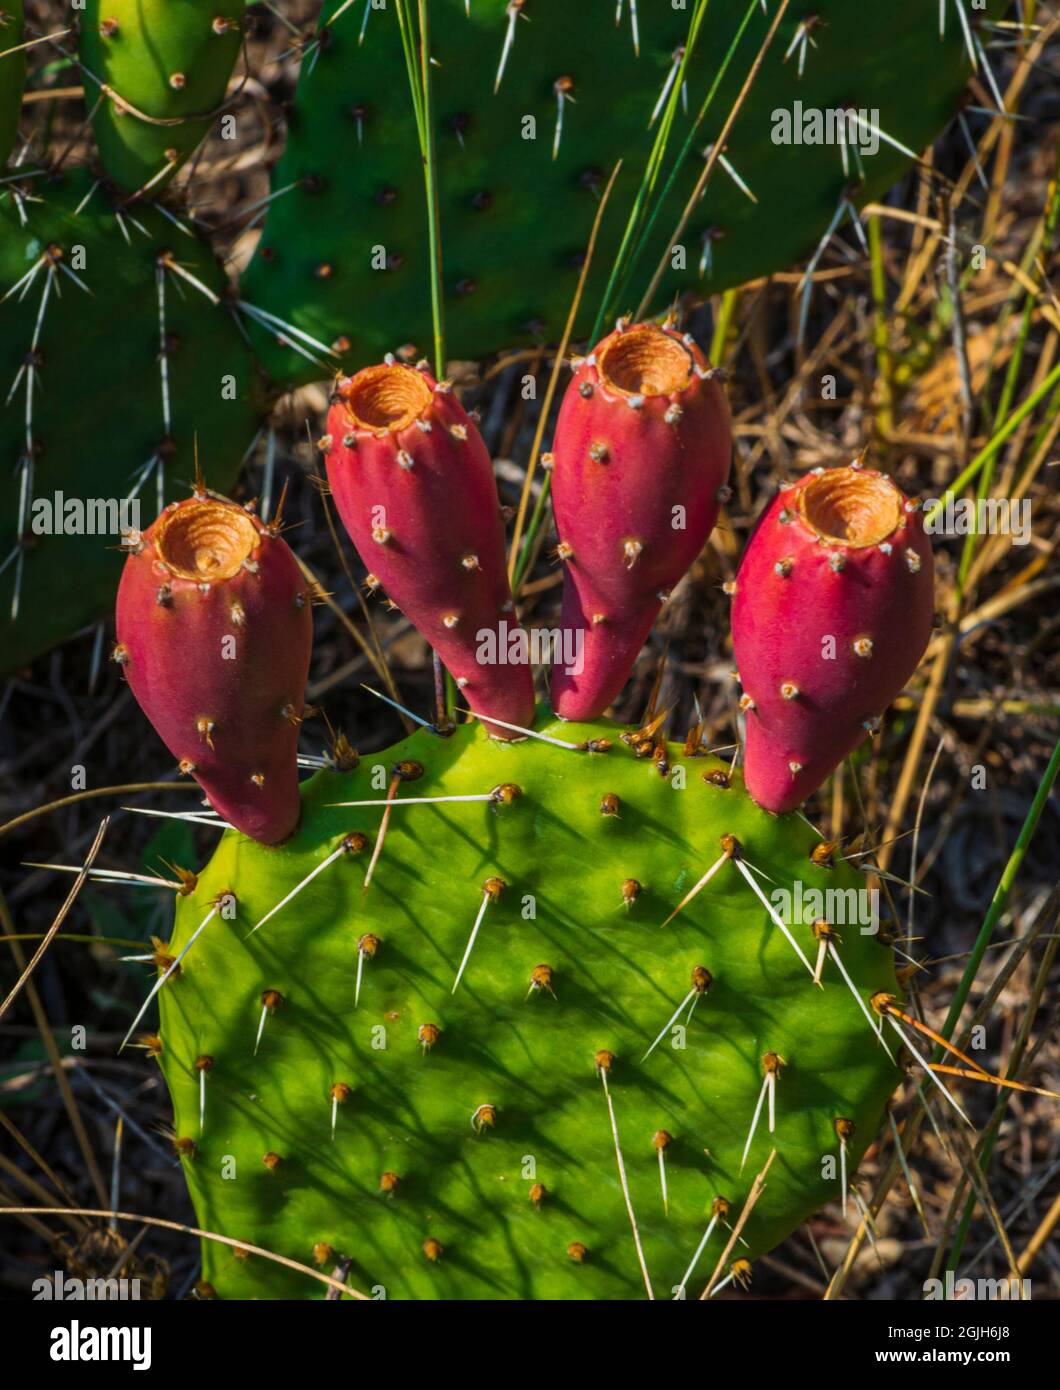 Red Prickly Pears- fruit grow ripe on top of Prickly Pear Cactus (Cactacea) near East Plum Creek, Castle Rock Colorado USA. Photo taken in August. Stock Photo